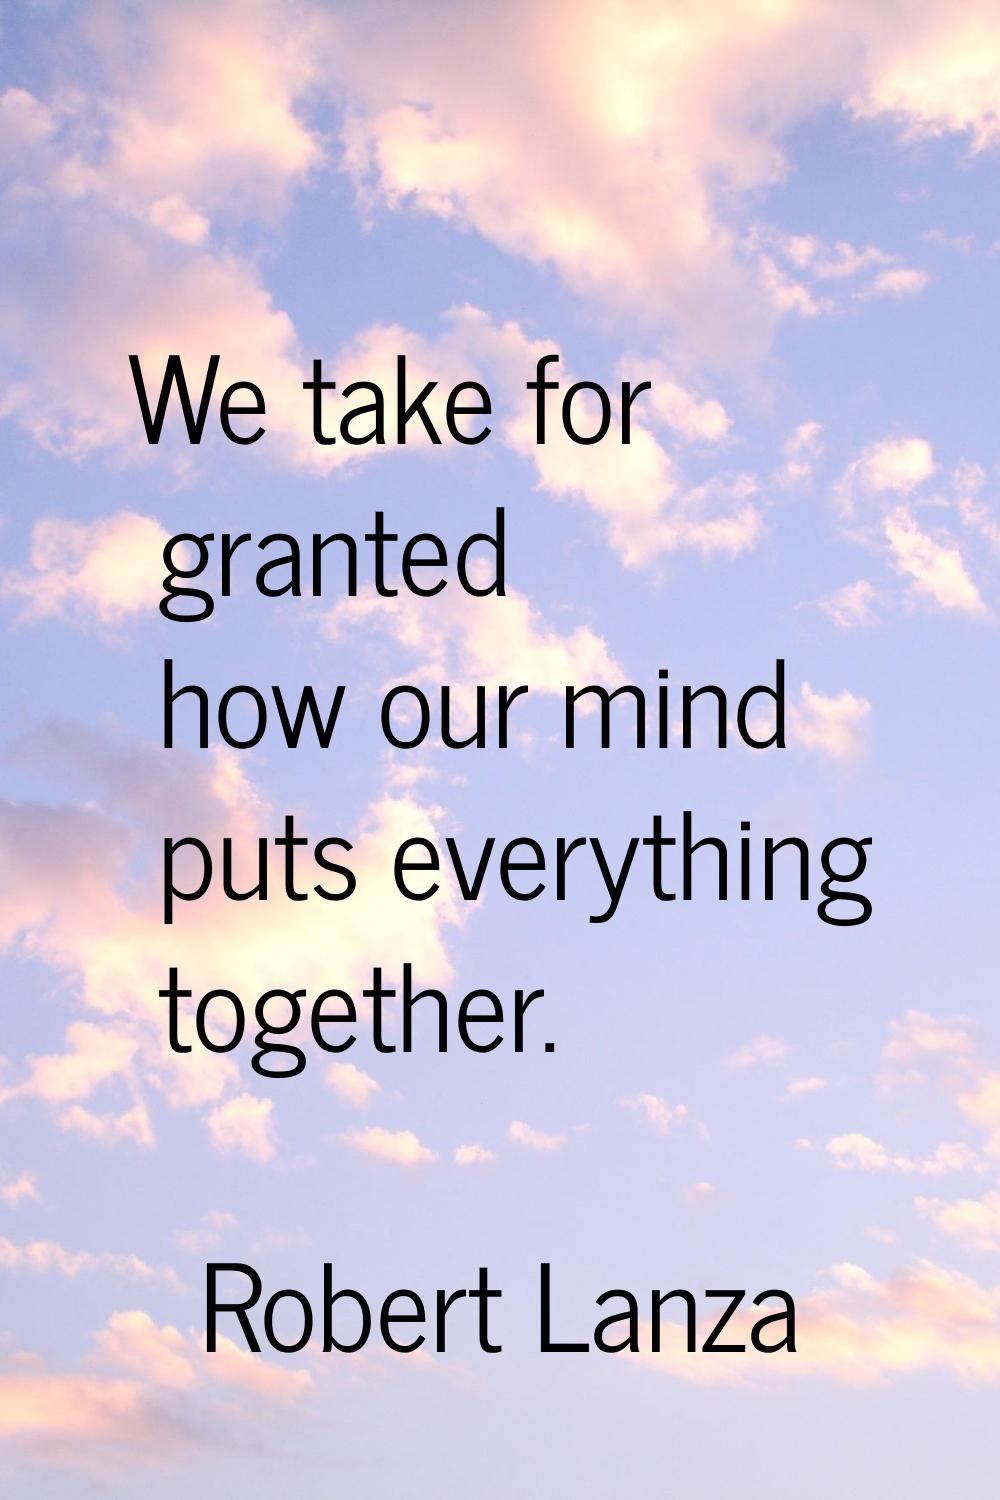 We take for granted how our mind puts everything together.